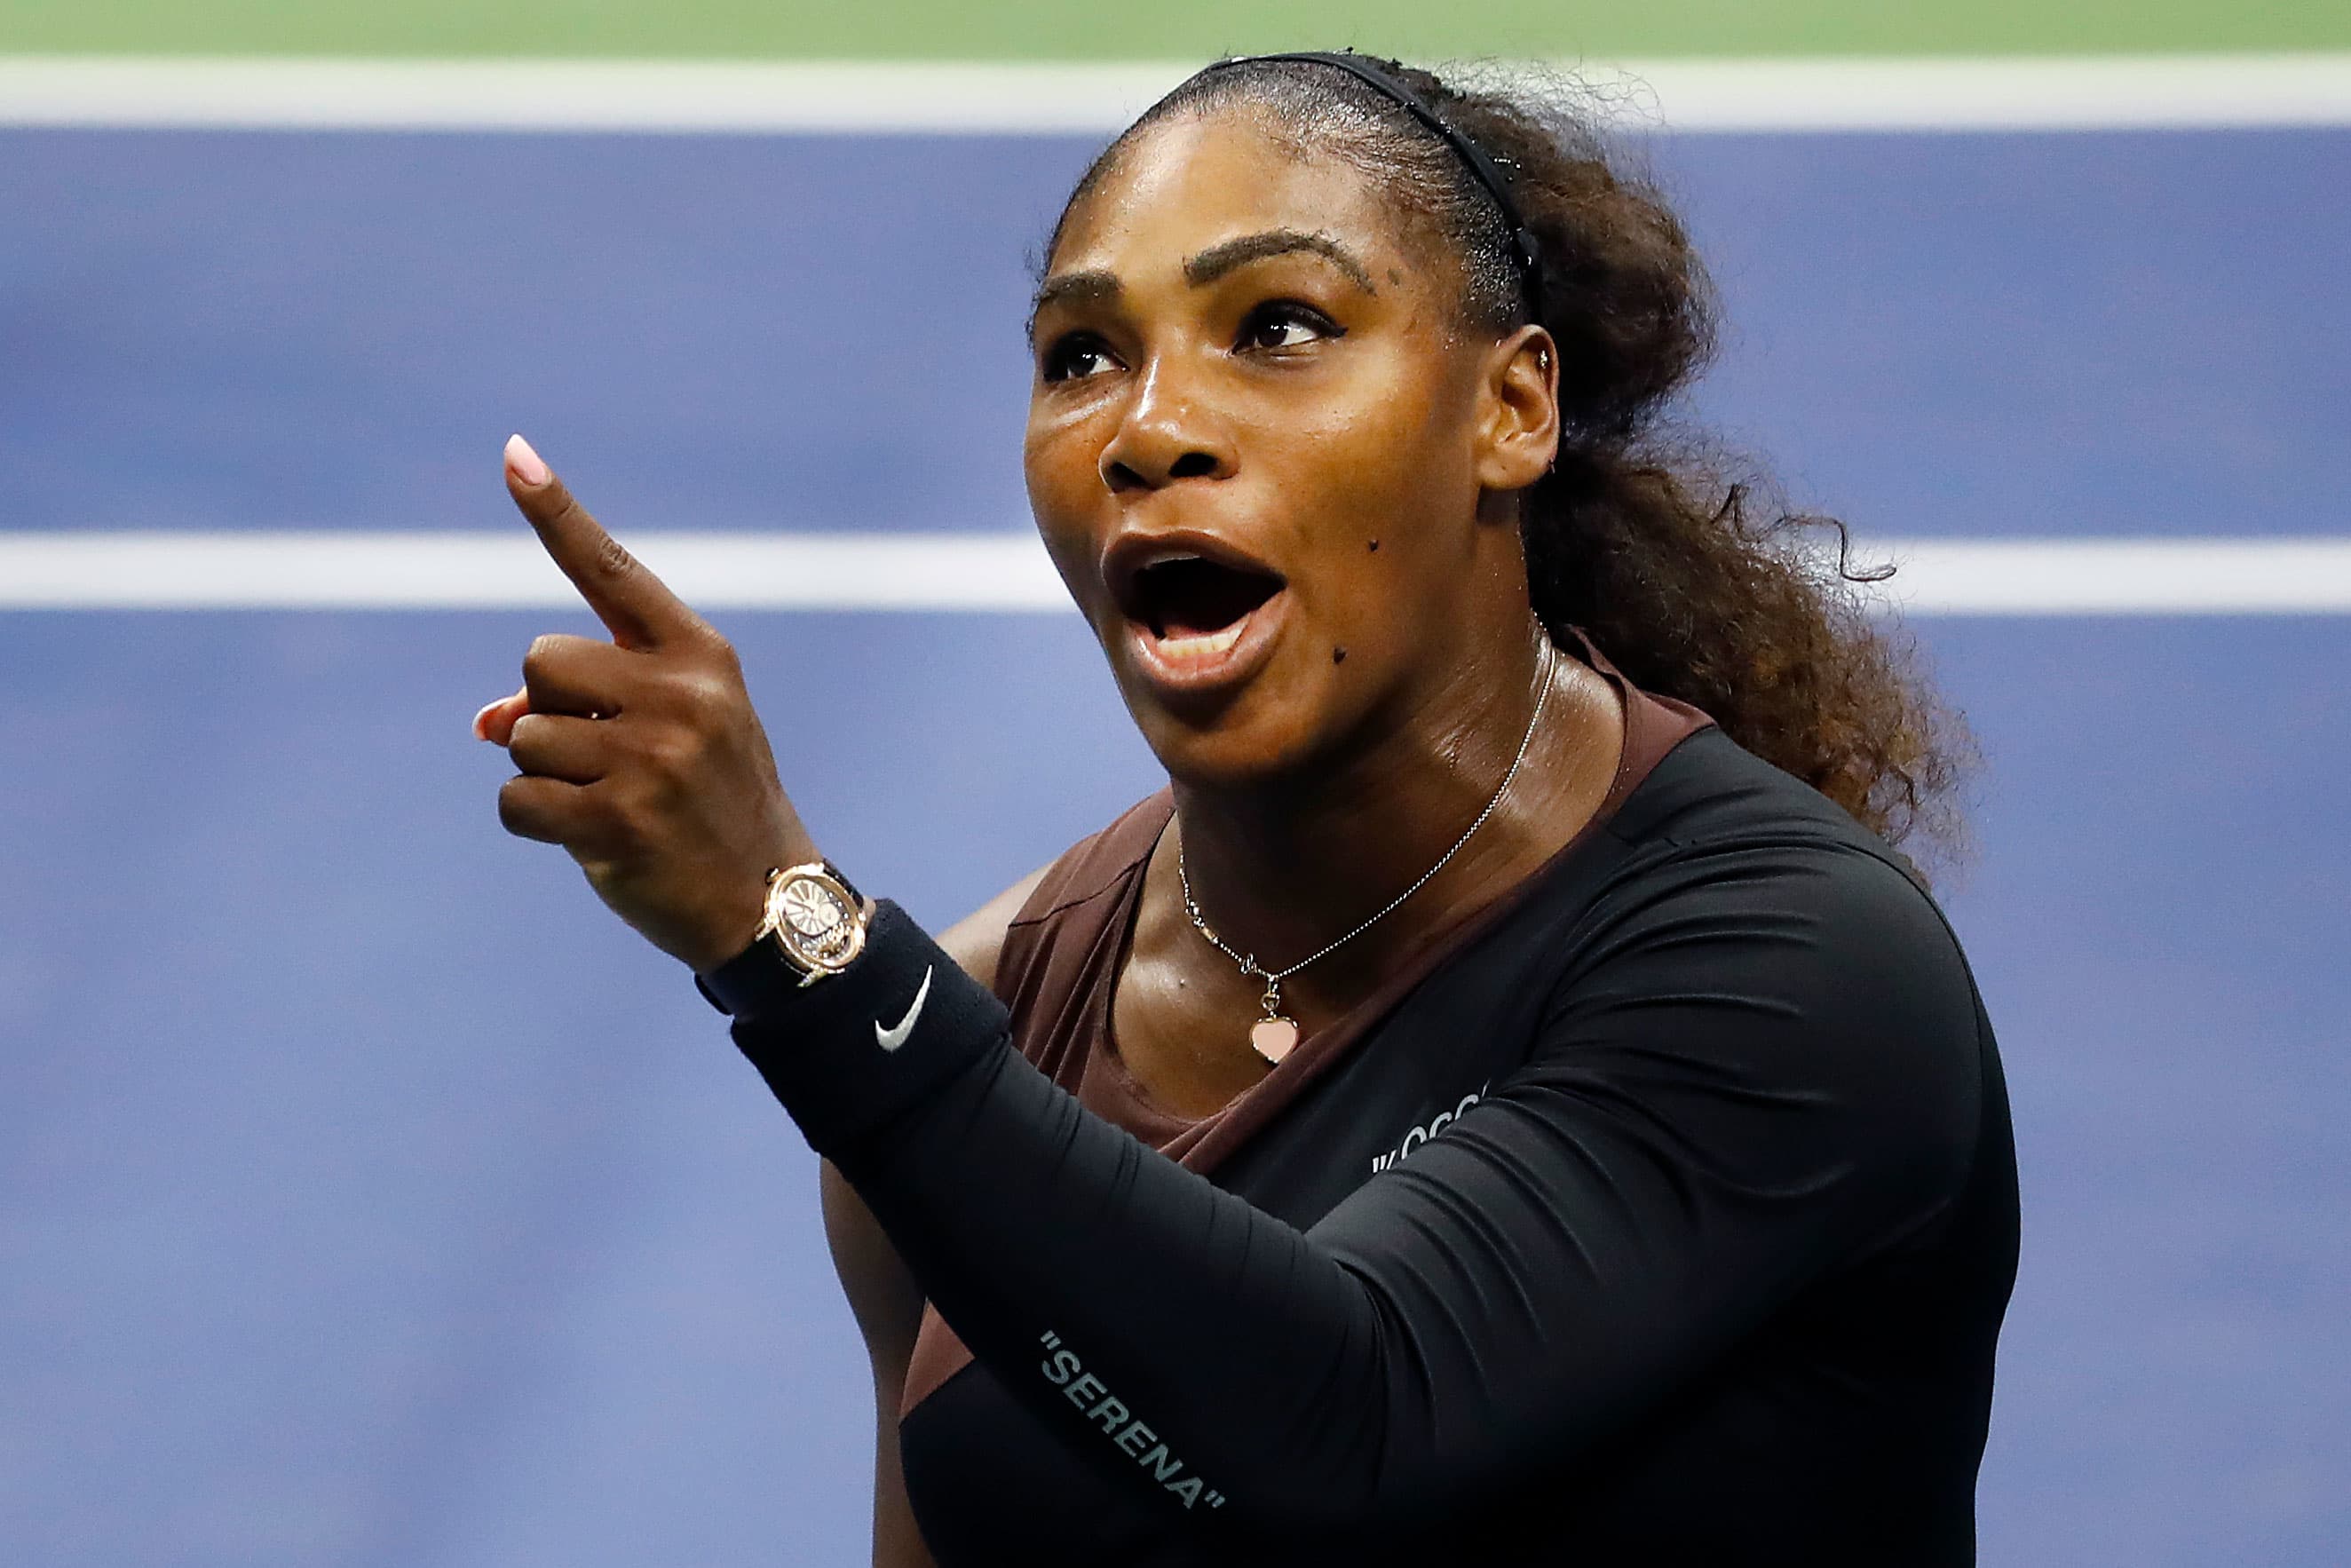 Serena Williams on how to handle naysayers